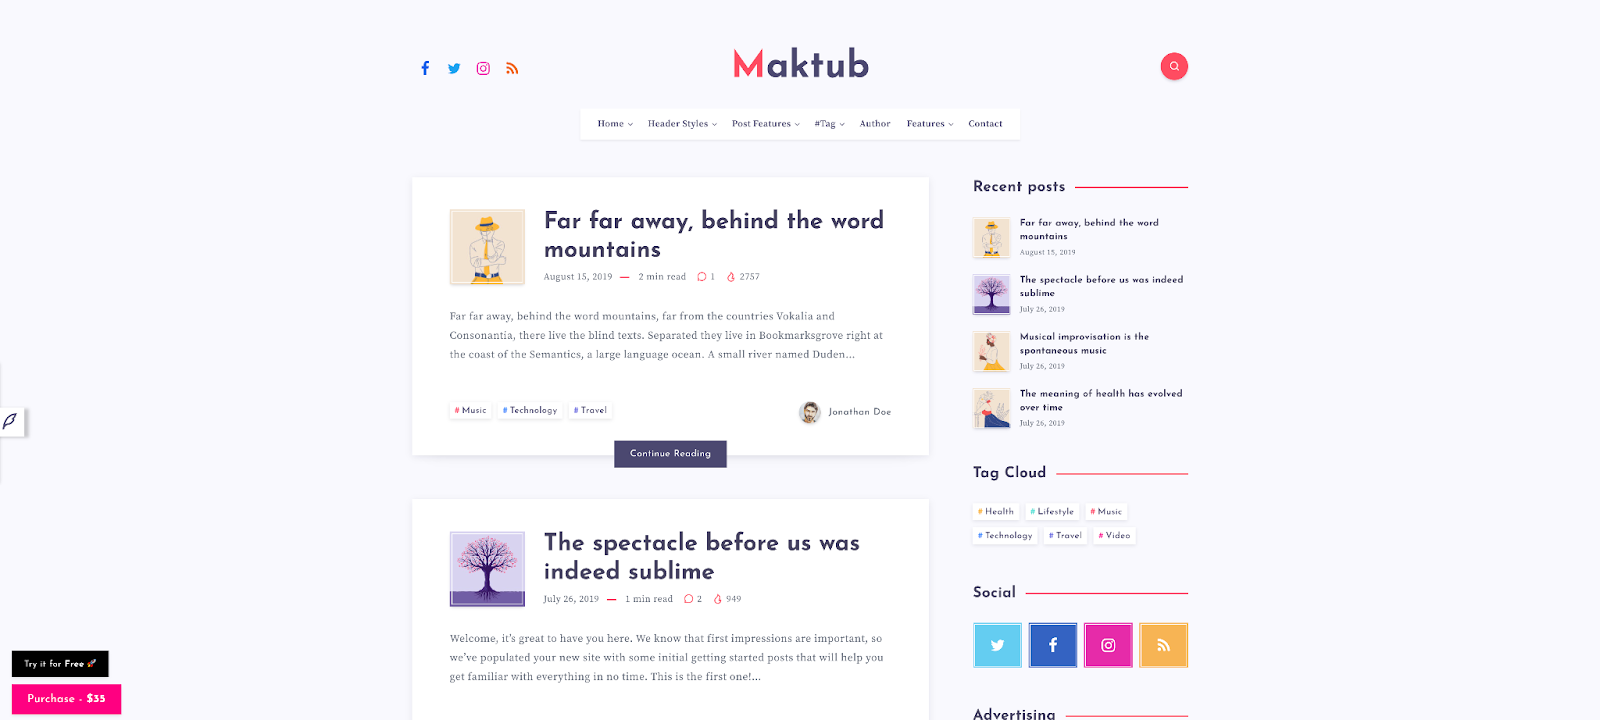 Use Maktub to build a colorful blog on either WordPress or the Ghost platform